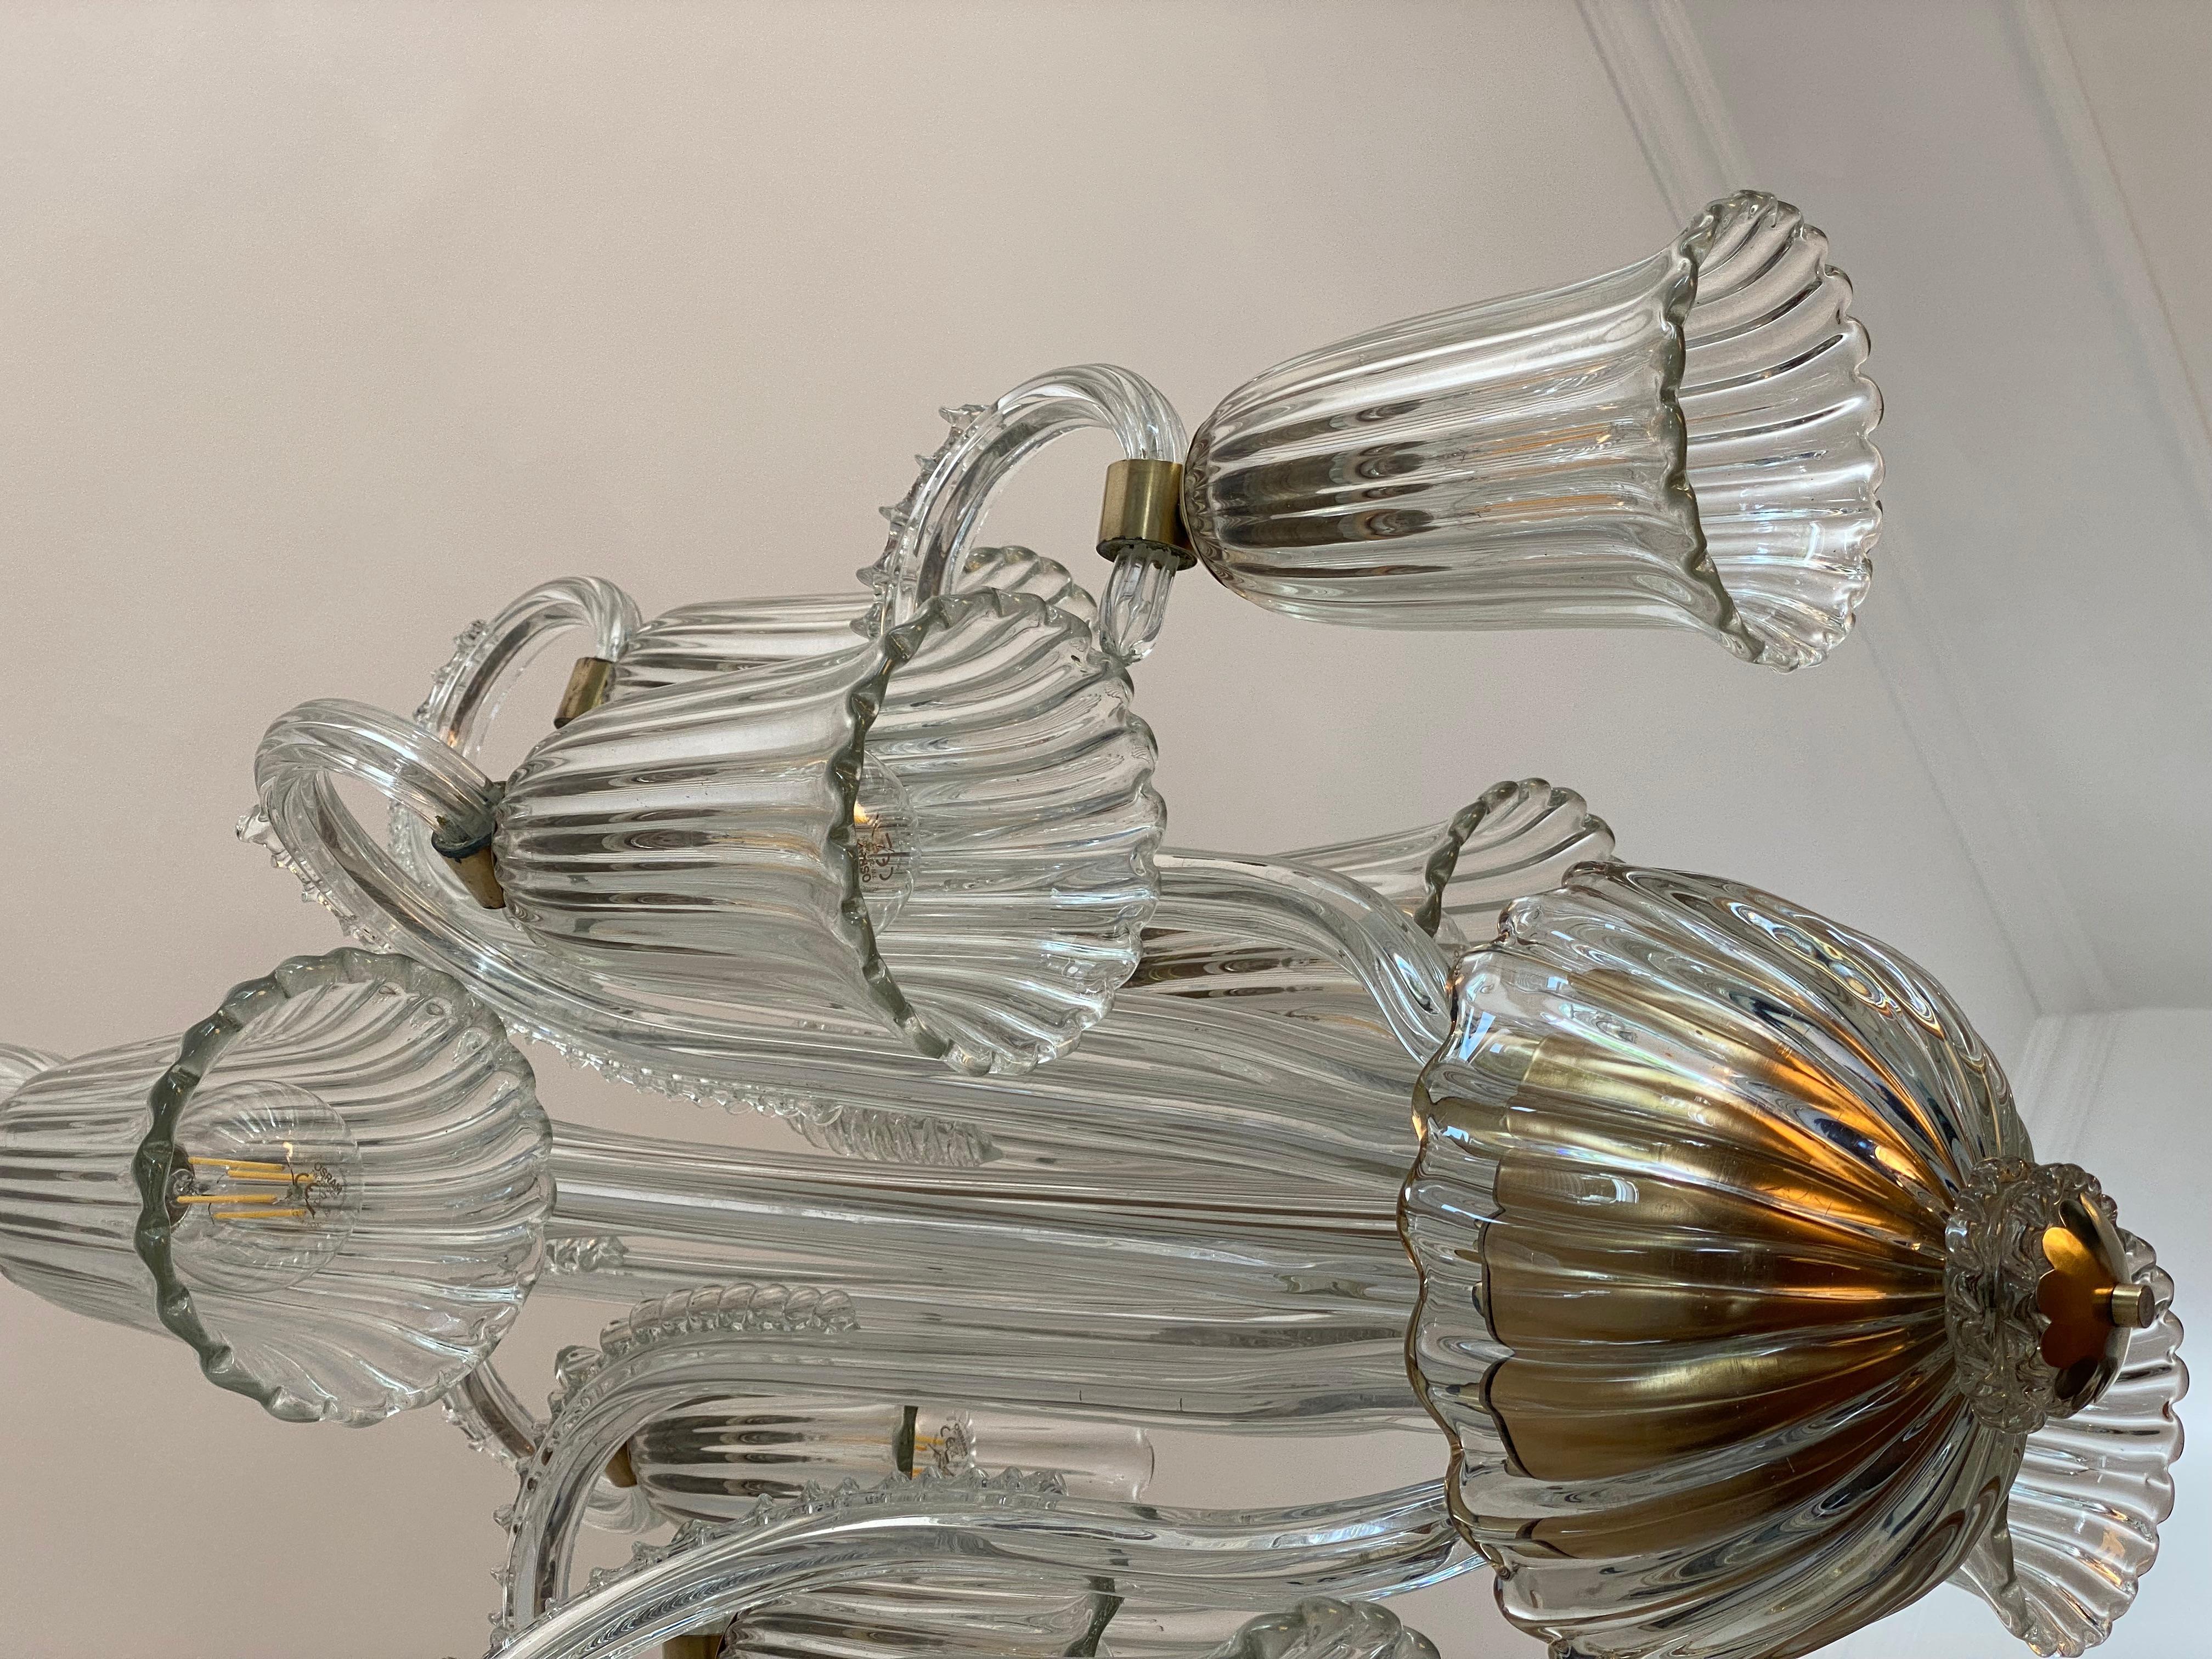 Charming Italian Chandelier by Ercole Barovier, Murano, 1940s For Sale 13